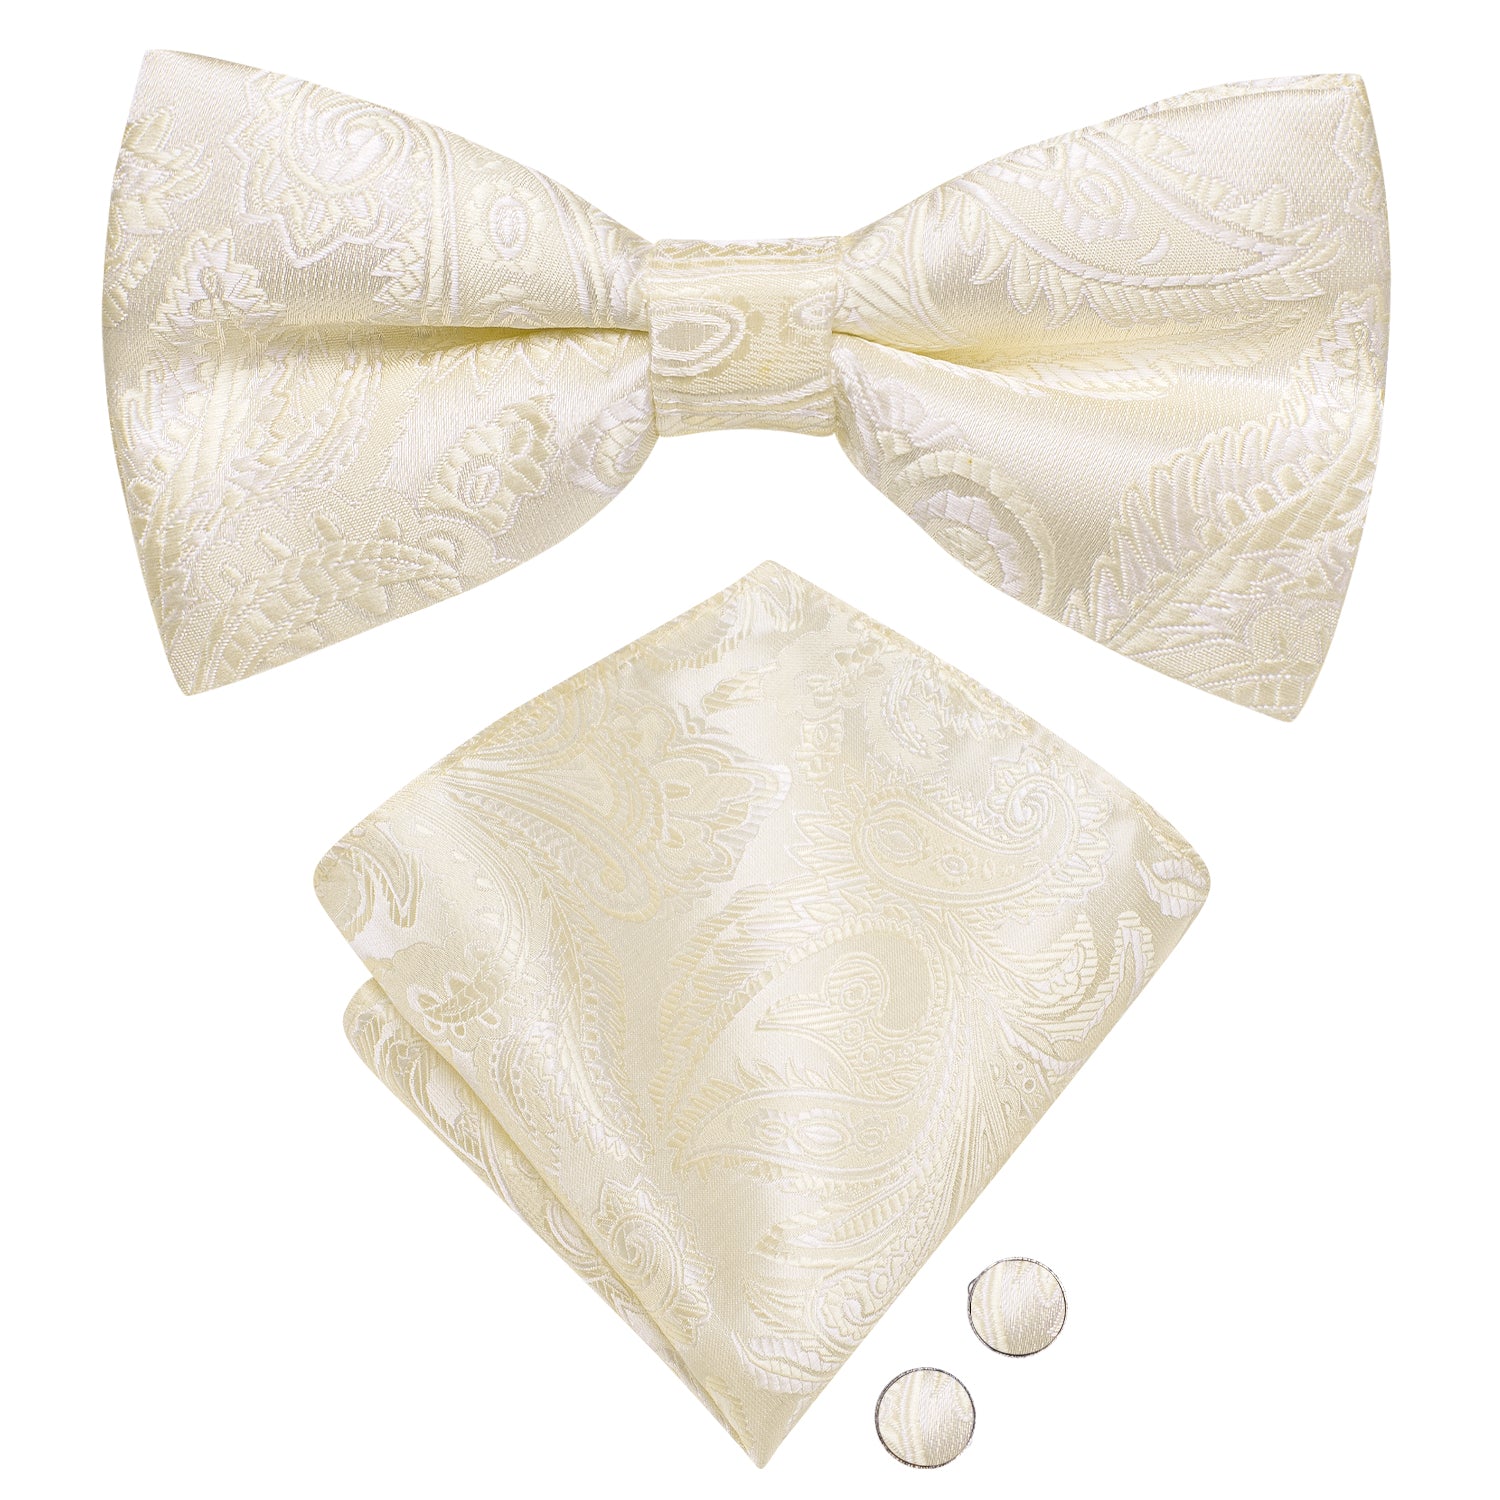 New Champagne White Paisley Pre-tied Bow Tie Hanky Cufflinks Set